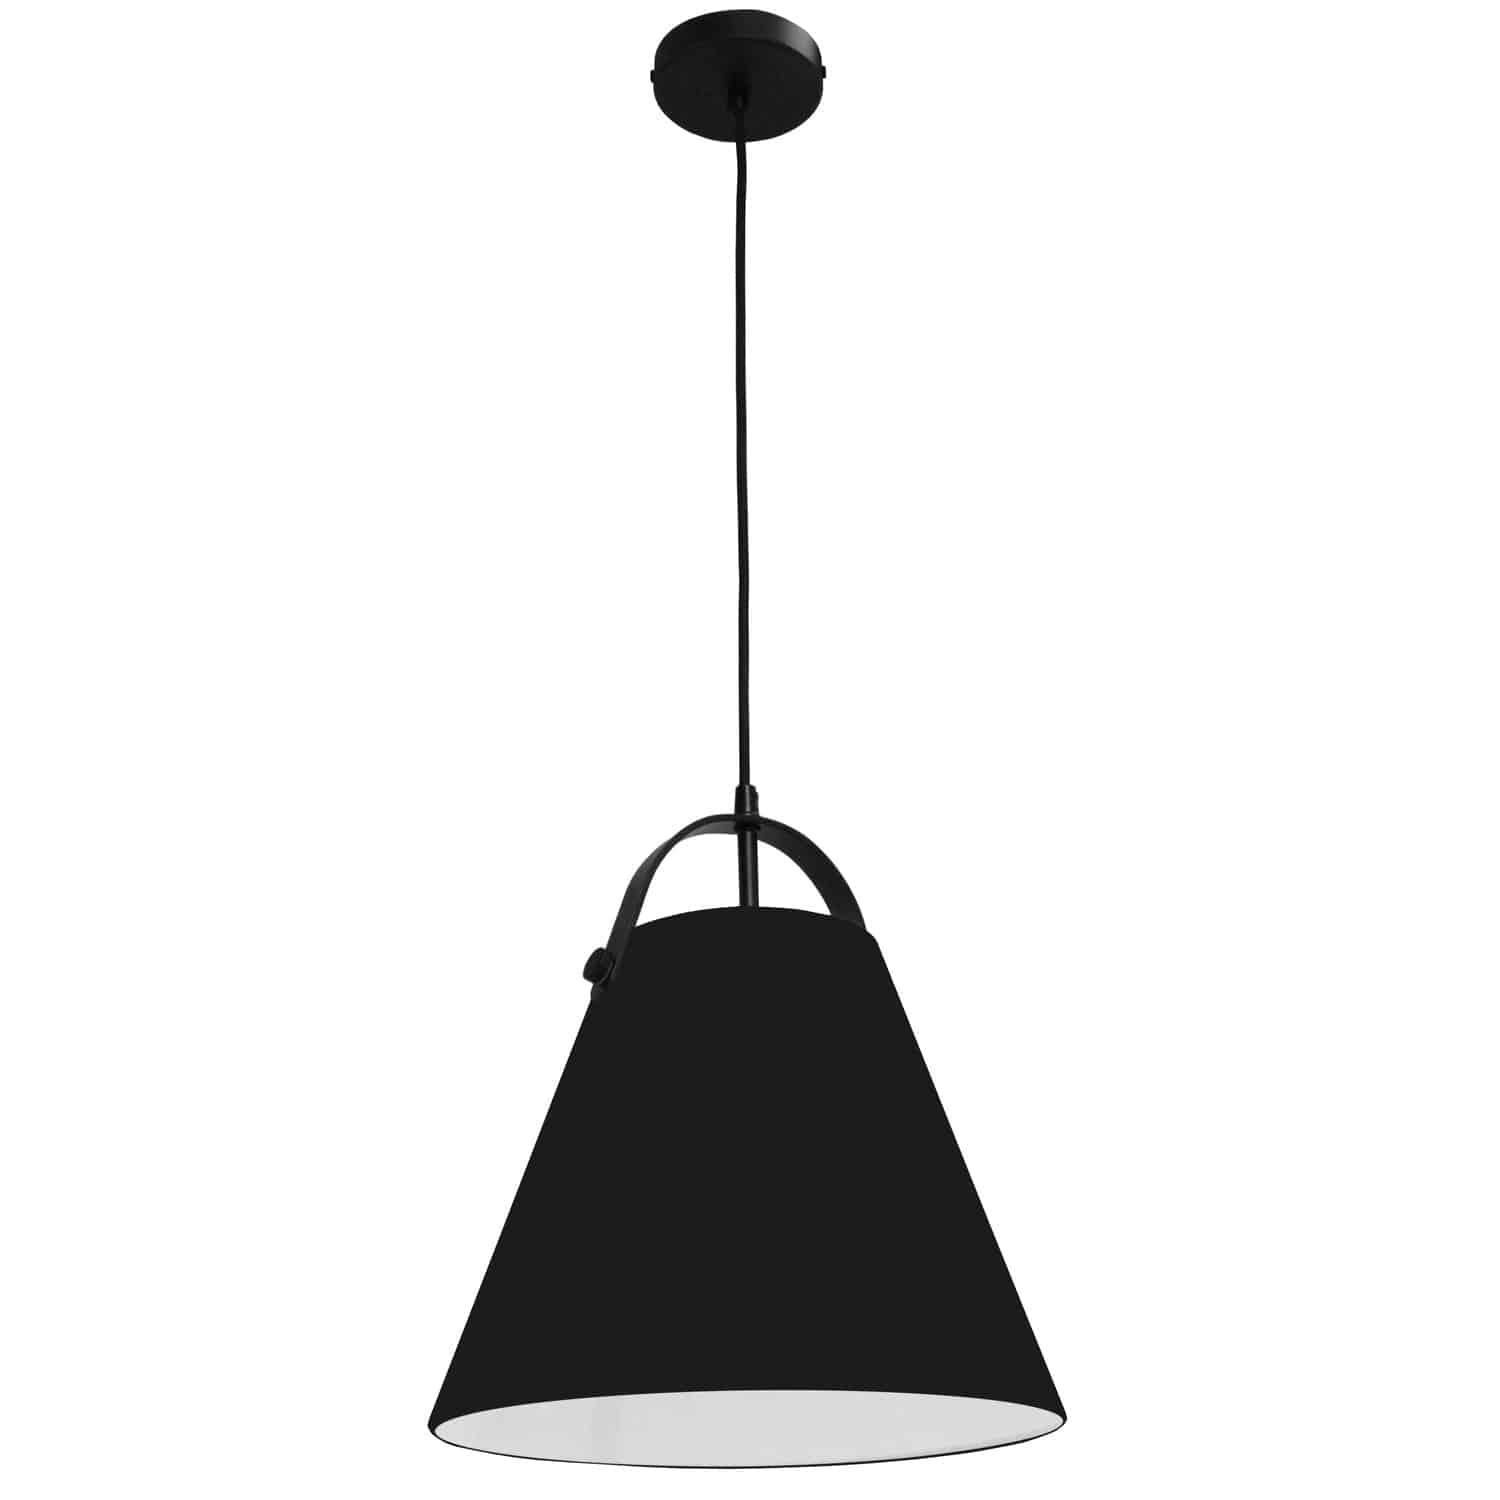 The Emperor family of lighting makes a clear statement about your sense of style. Its tapered silhouette creates a versatile look that can work with any contemporary furnishings. The metal frame drops to a bell style fabric shade. The two basic elements are joined by a curved metal design element on the top side of the shade that draws the eye, and gives Emperor lighting its distinctive profile. Emperor lighting will enhance your décor in a stylish kitchen or dining room, or a main hallway in your home.